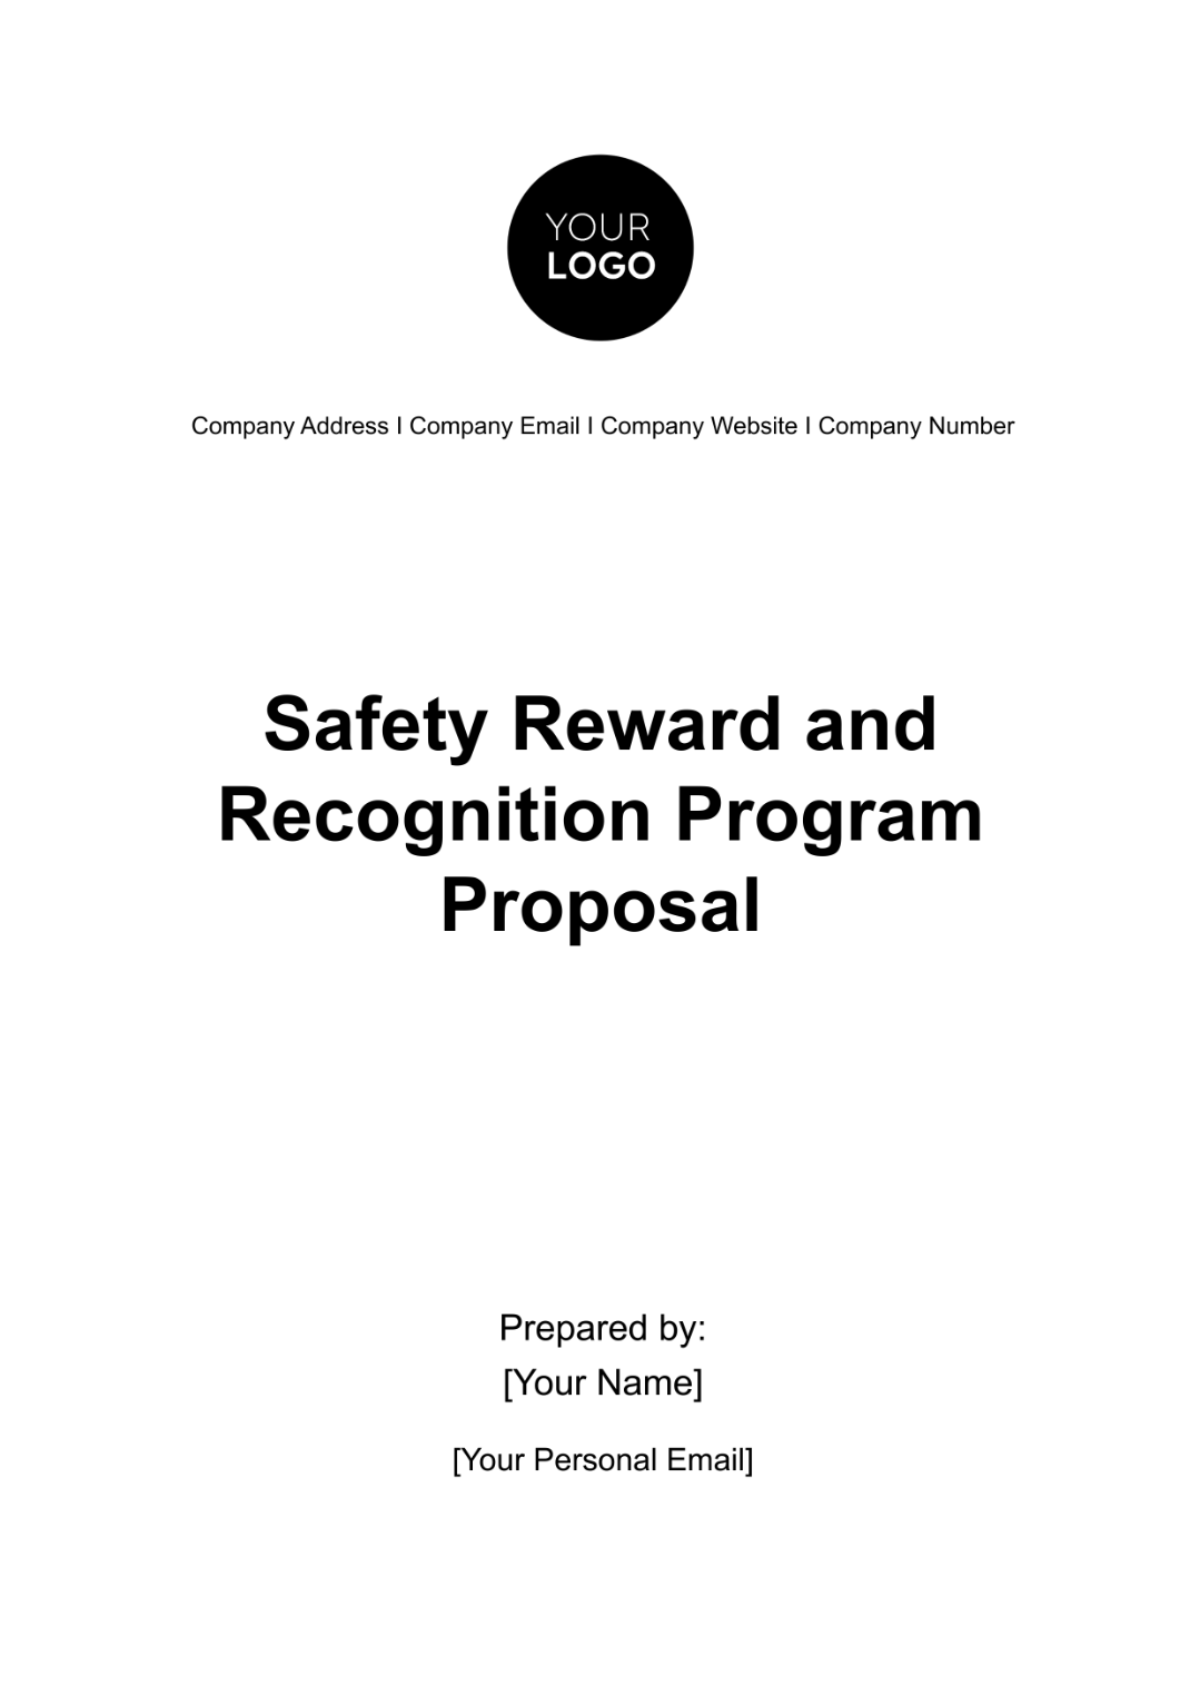 Free Safety Reward and Recognition Program Proposal HR Template